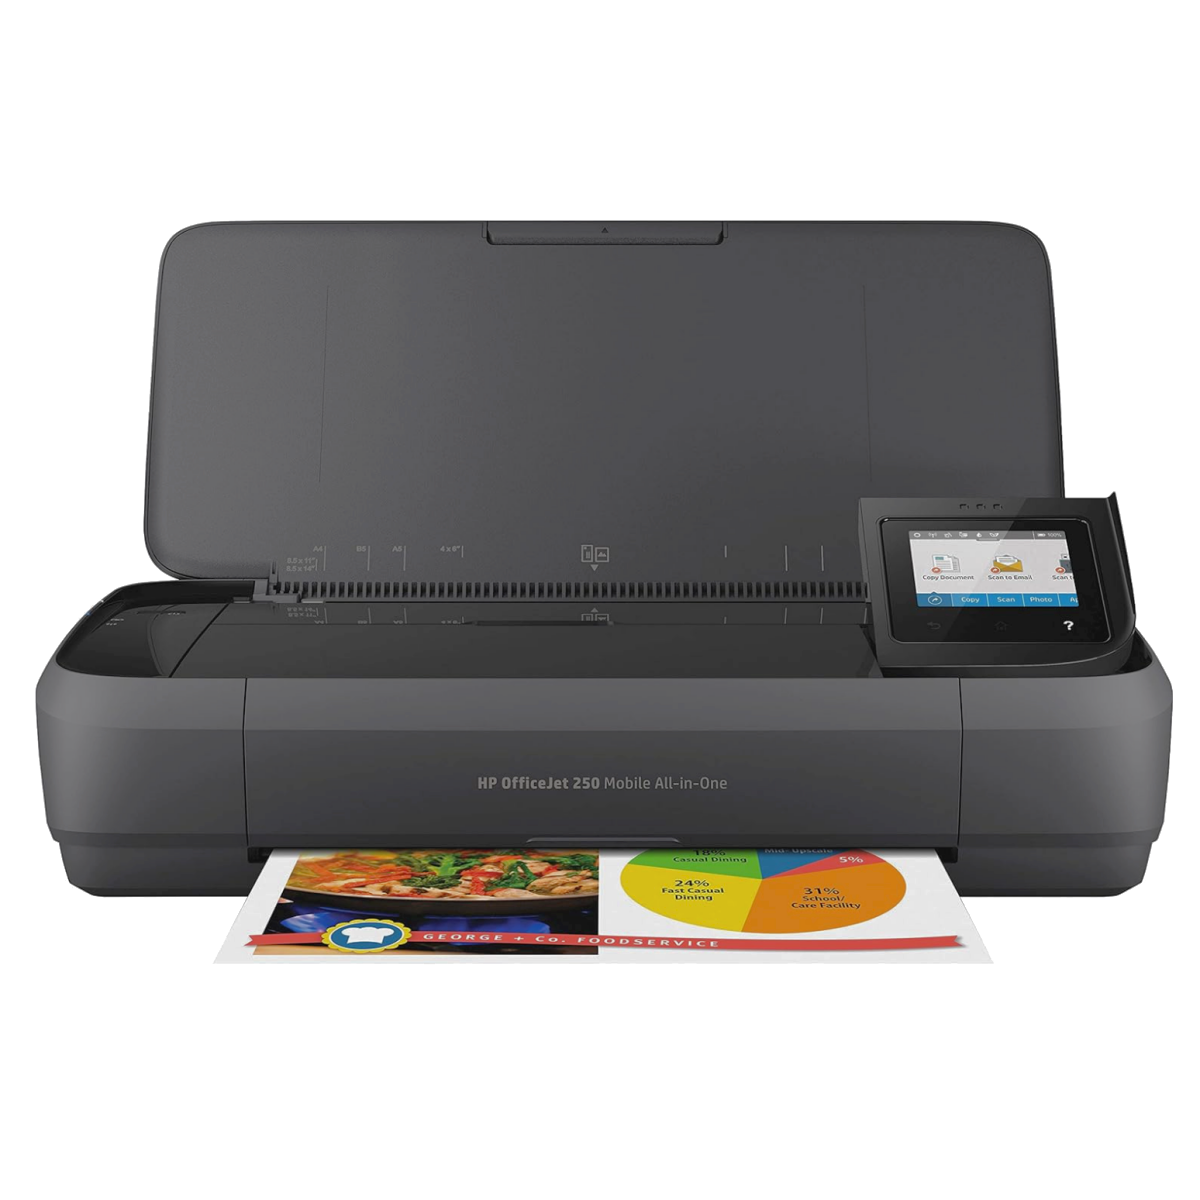 An HP OfficeJet 250 printing a color document